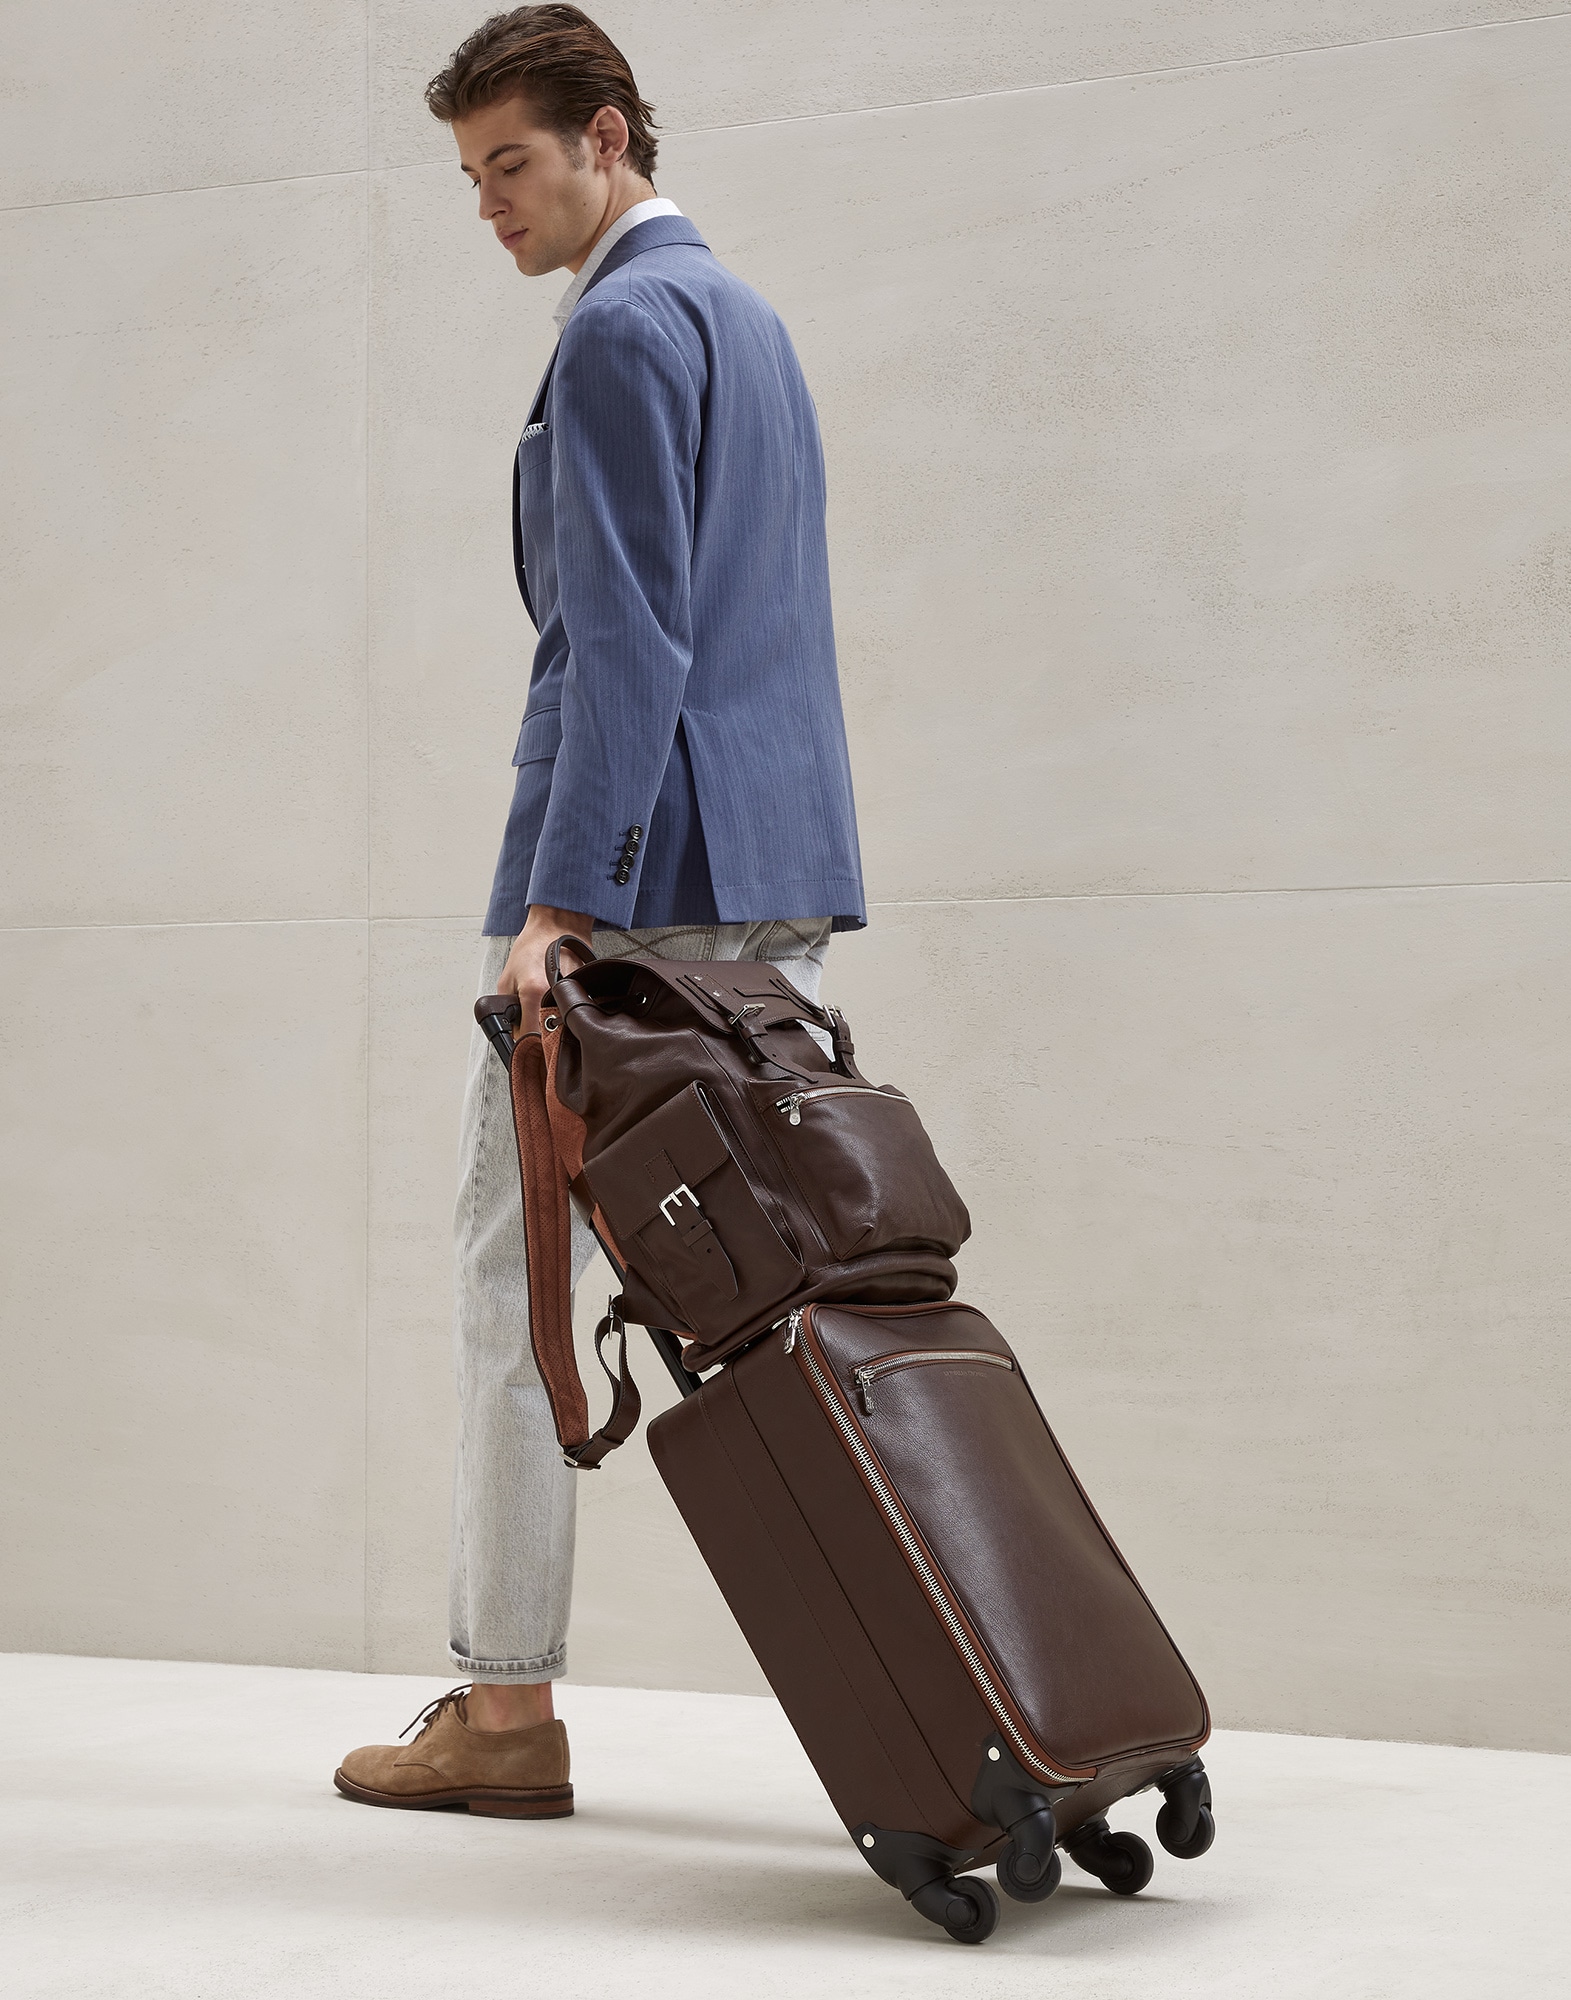 Men's leather bags and backpacks | Brunello Cucinelli